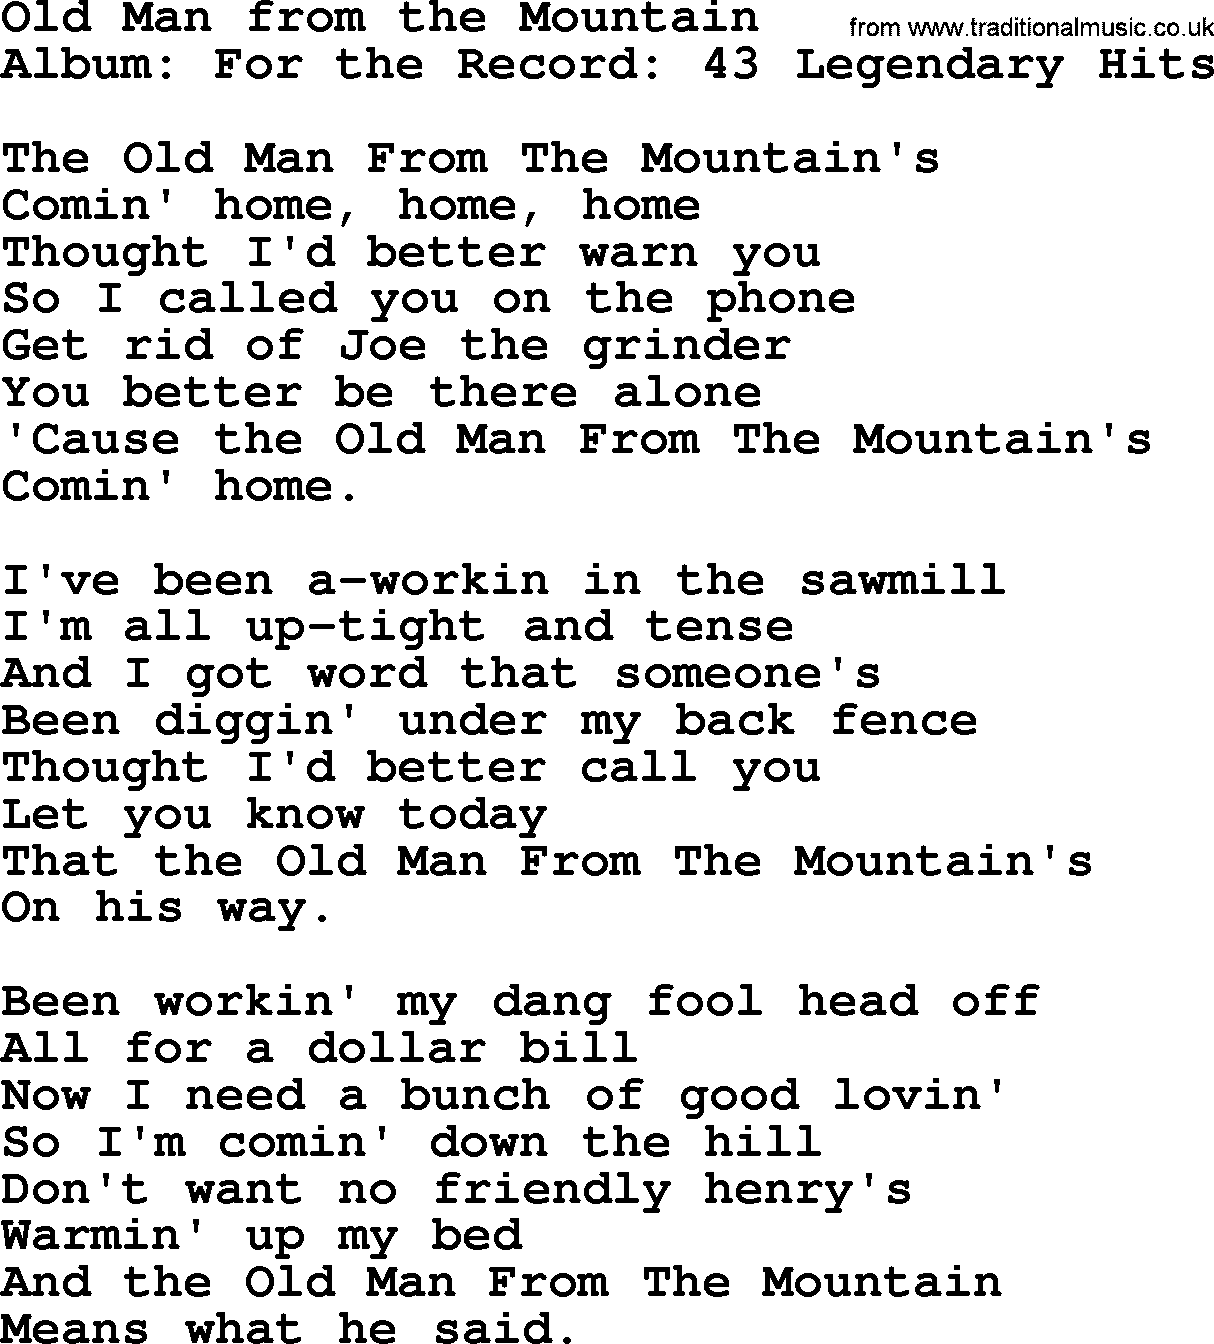 Merle Haggard song: Old Man From The Mountain, lyrics.